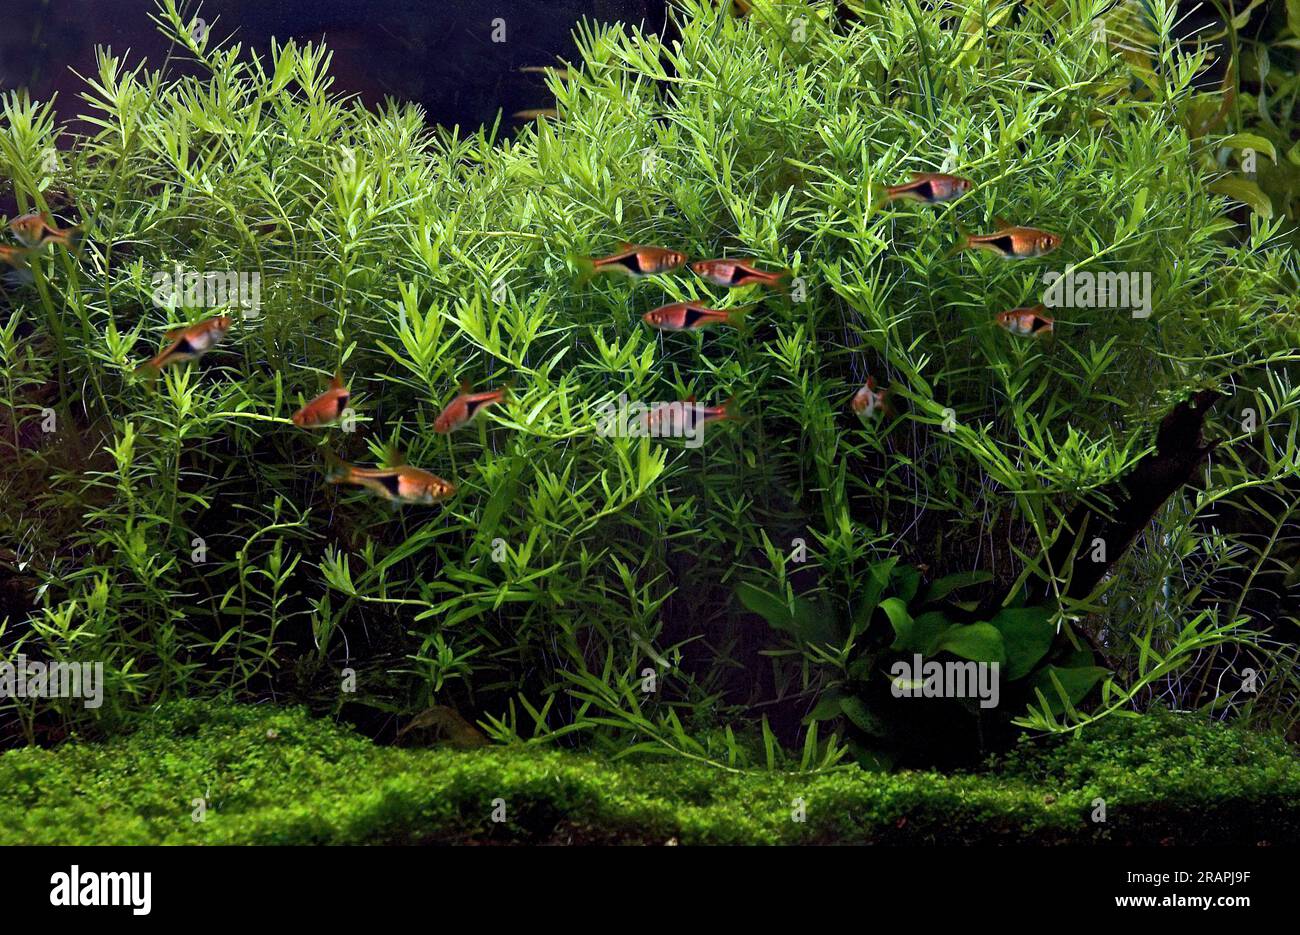 Beautiful freshwater aquarium with dense growth of plants living in harmony with peaceful, small fishes. Stock Photo